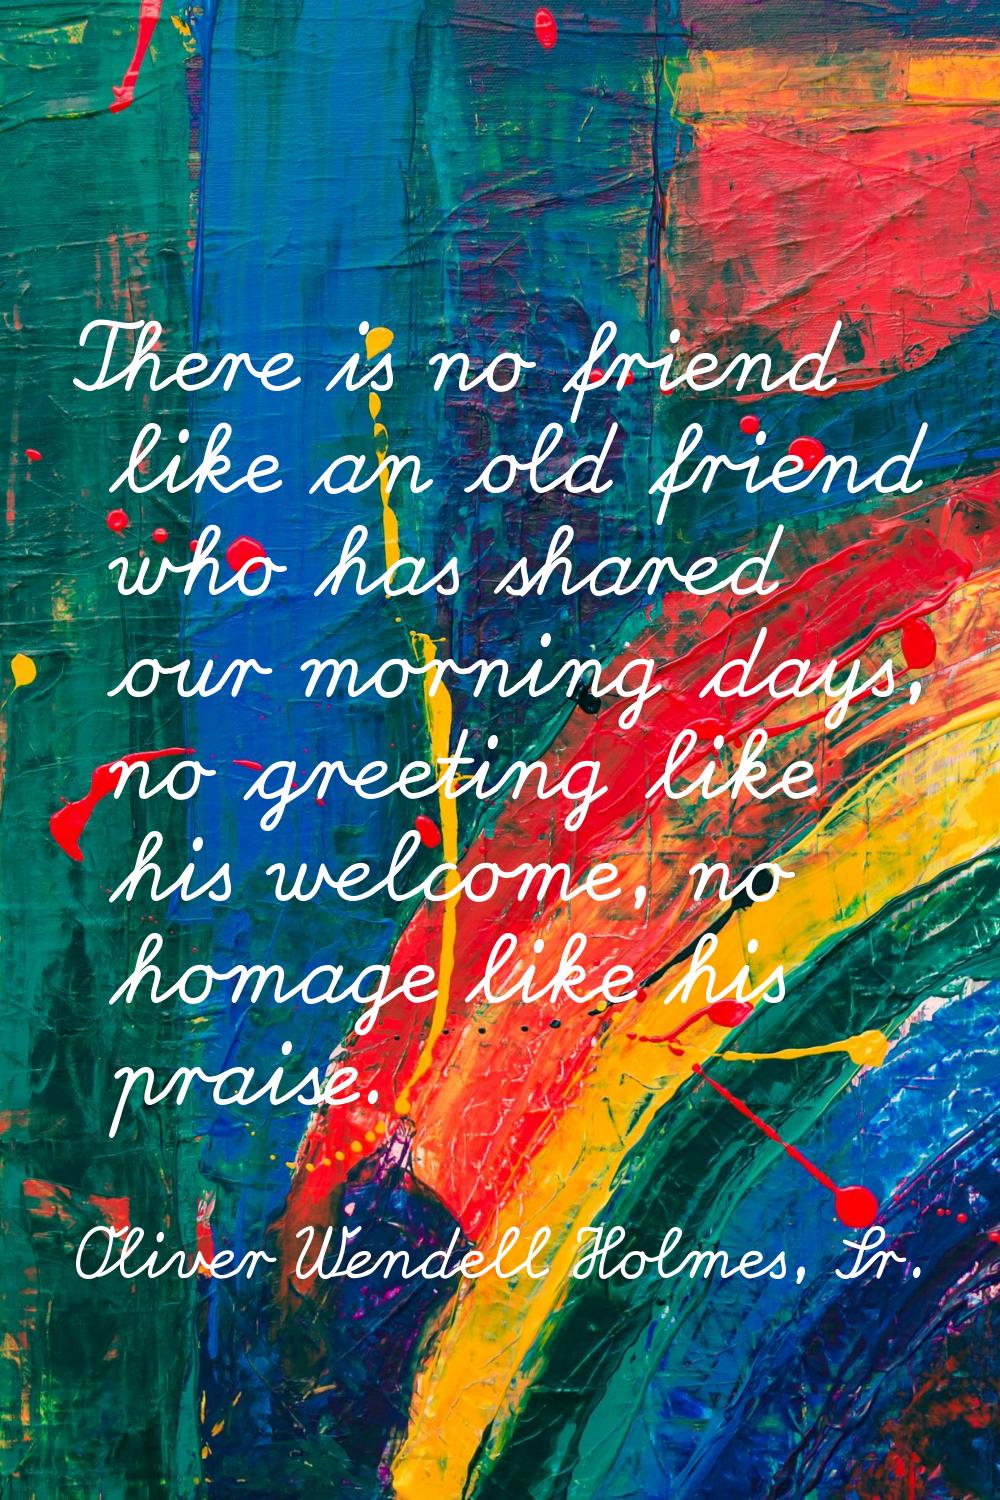 There is no friend like an old friend who has shared our morning days, no greeting like his welcome